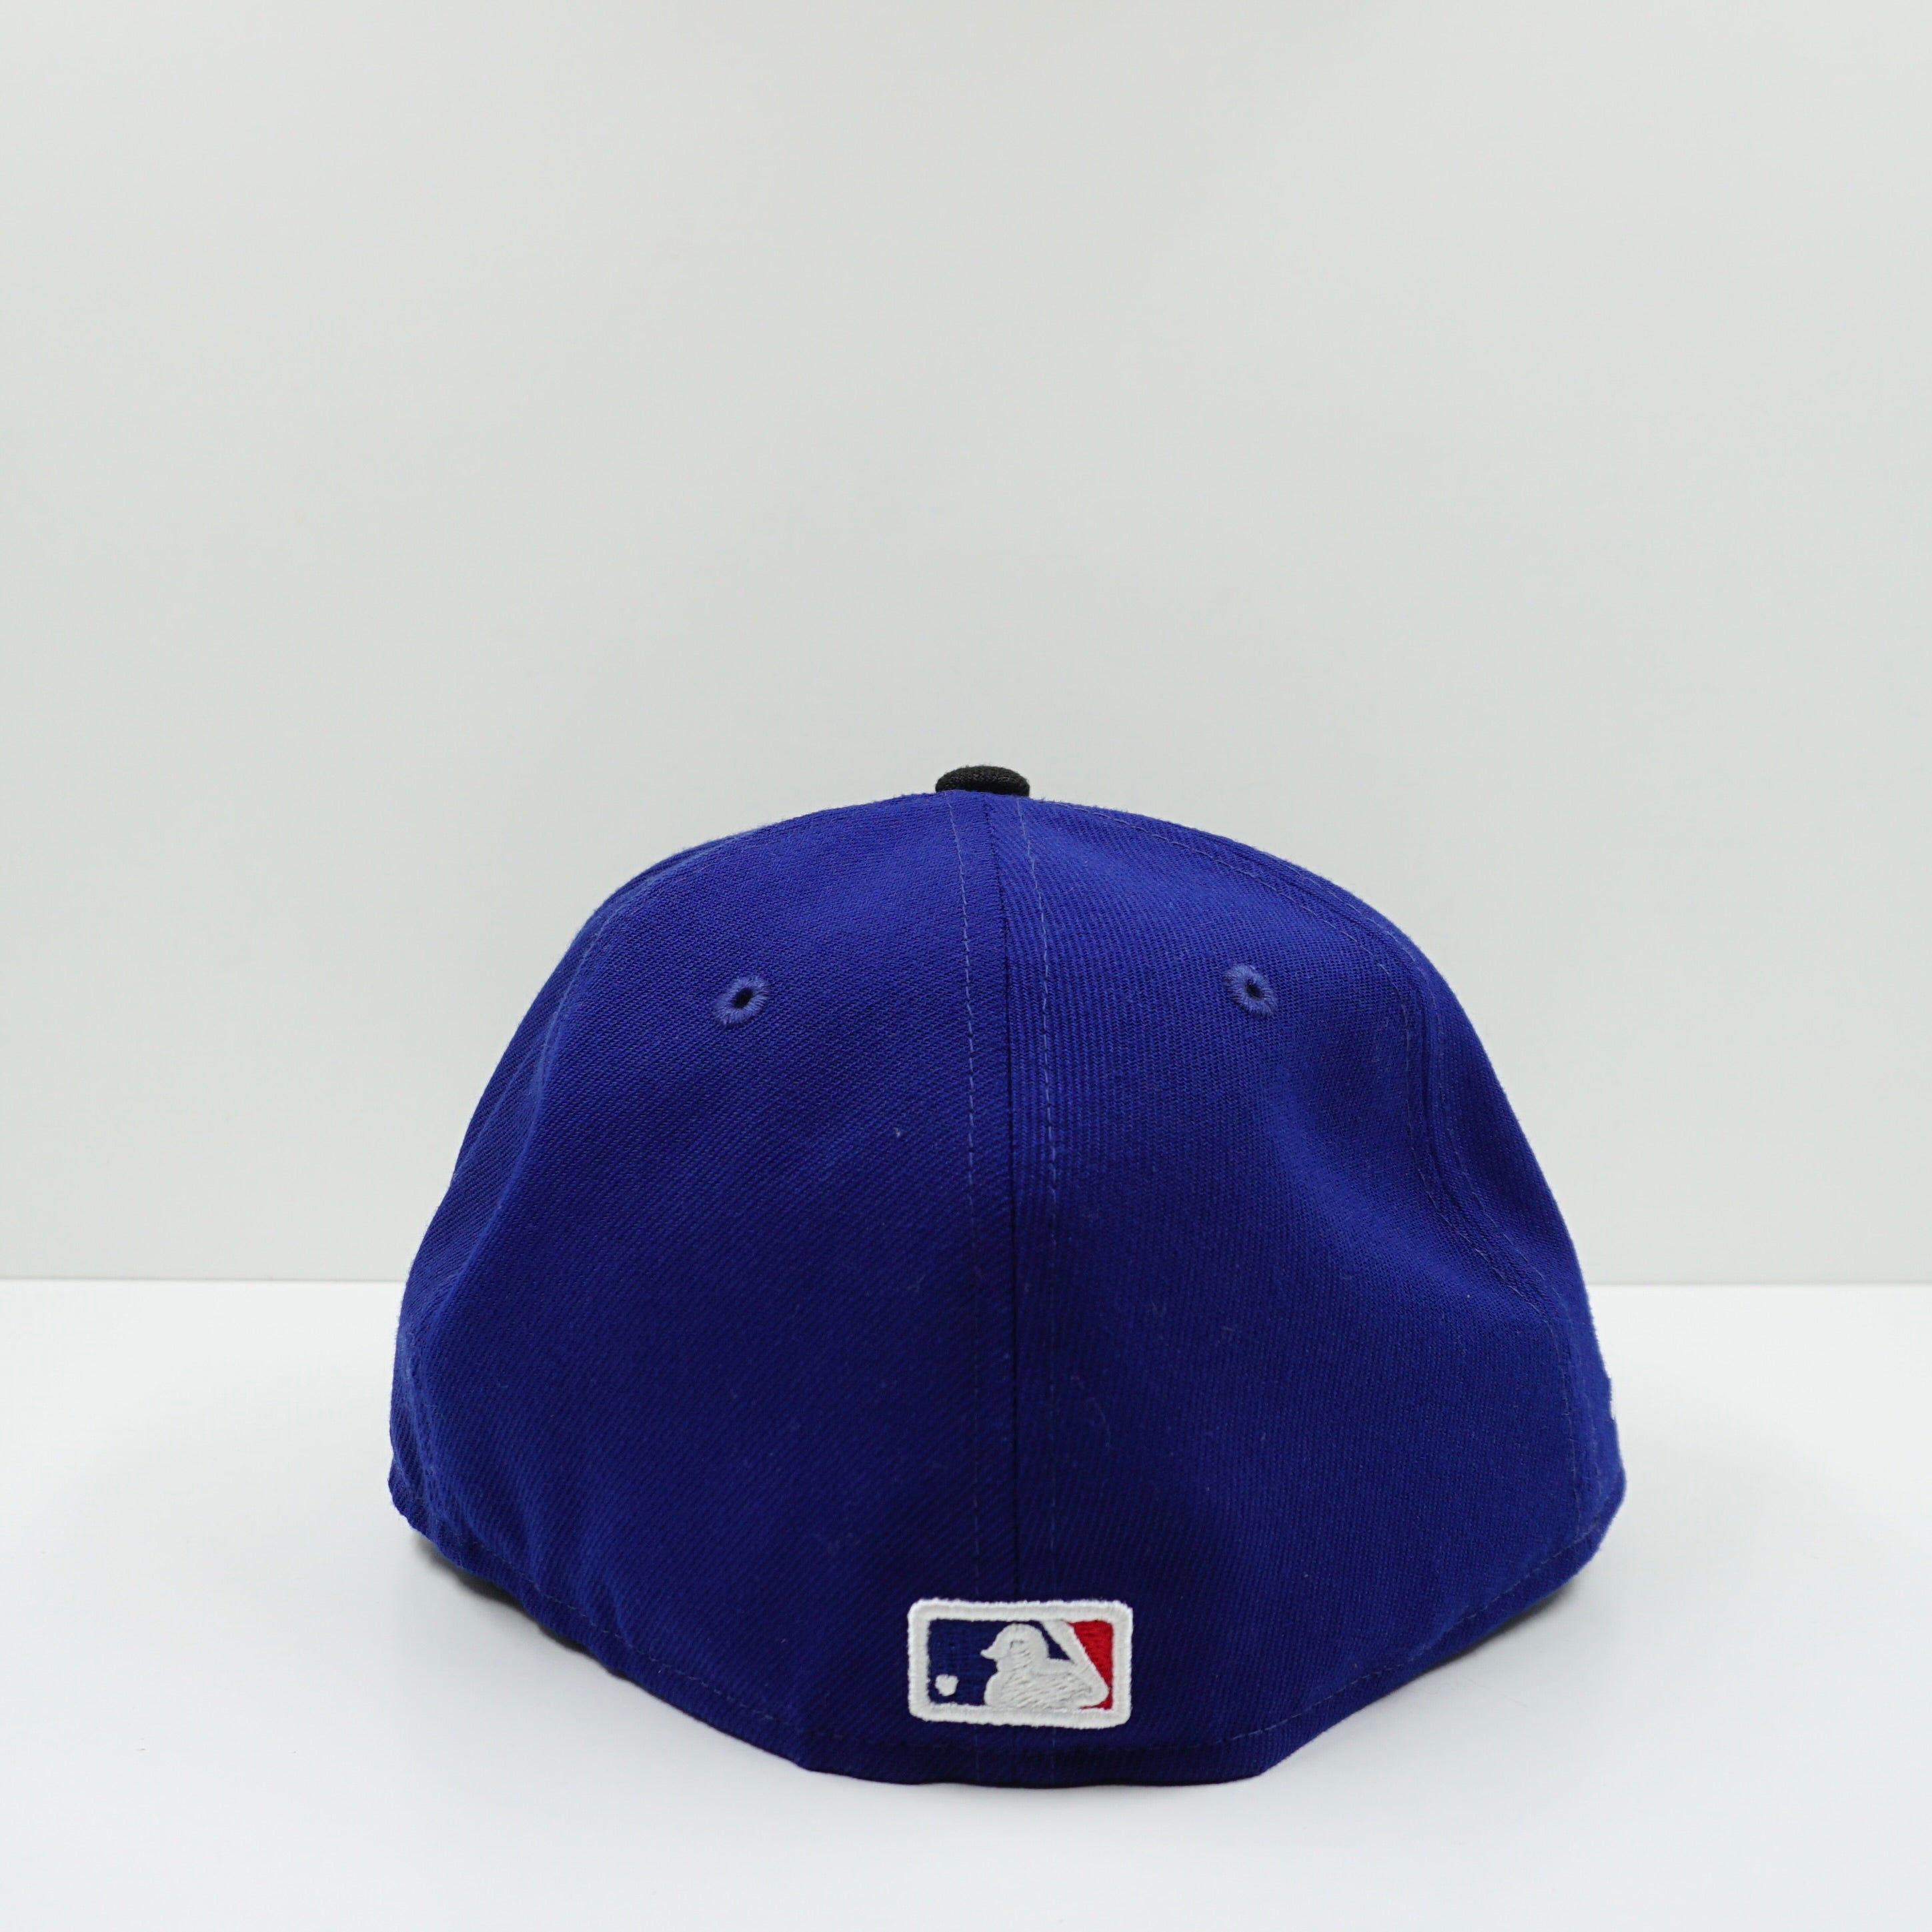 New Era Los Angeles Dodgers Blue Black Fitted Cap